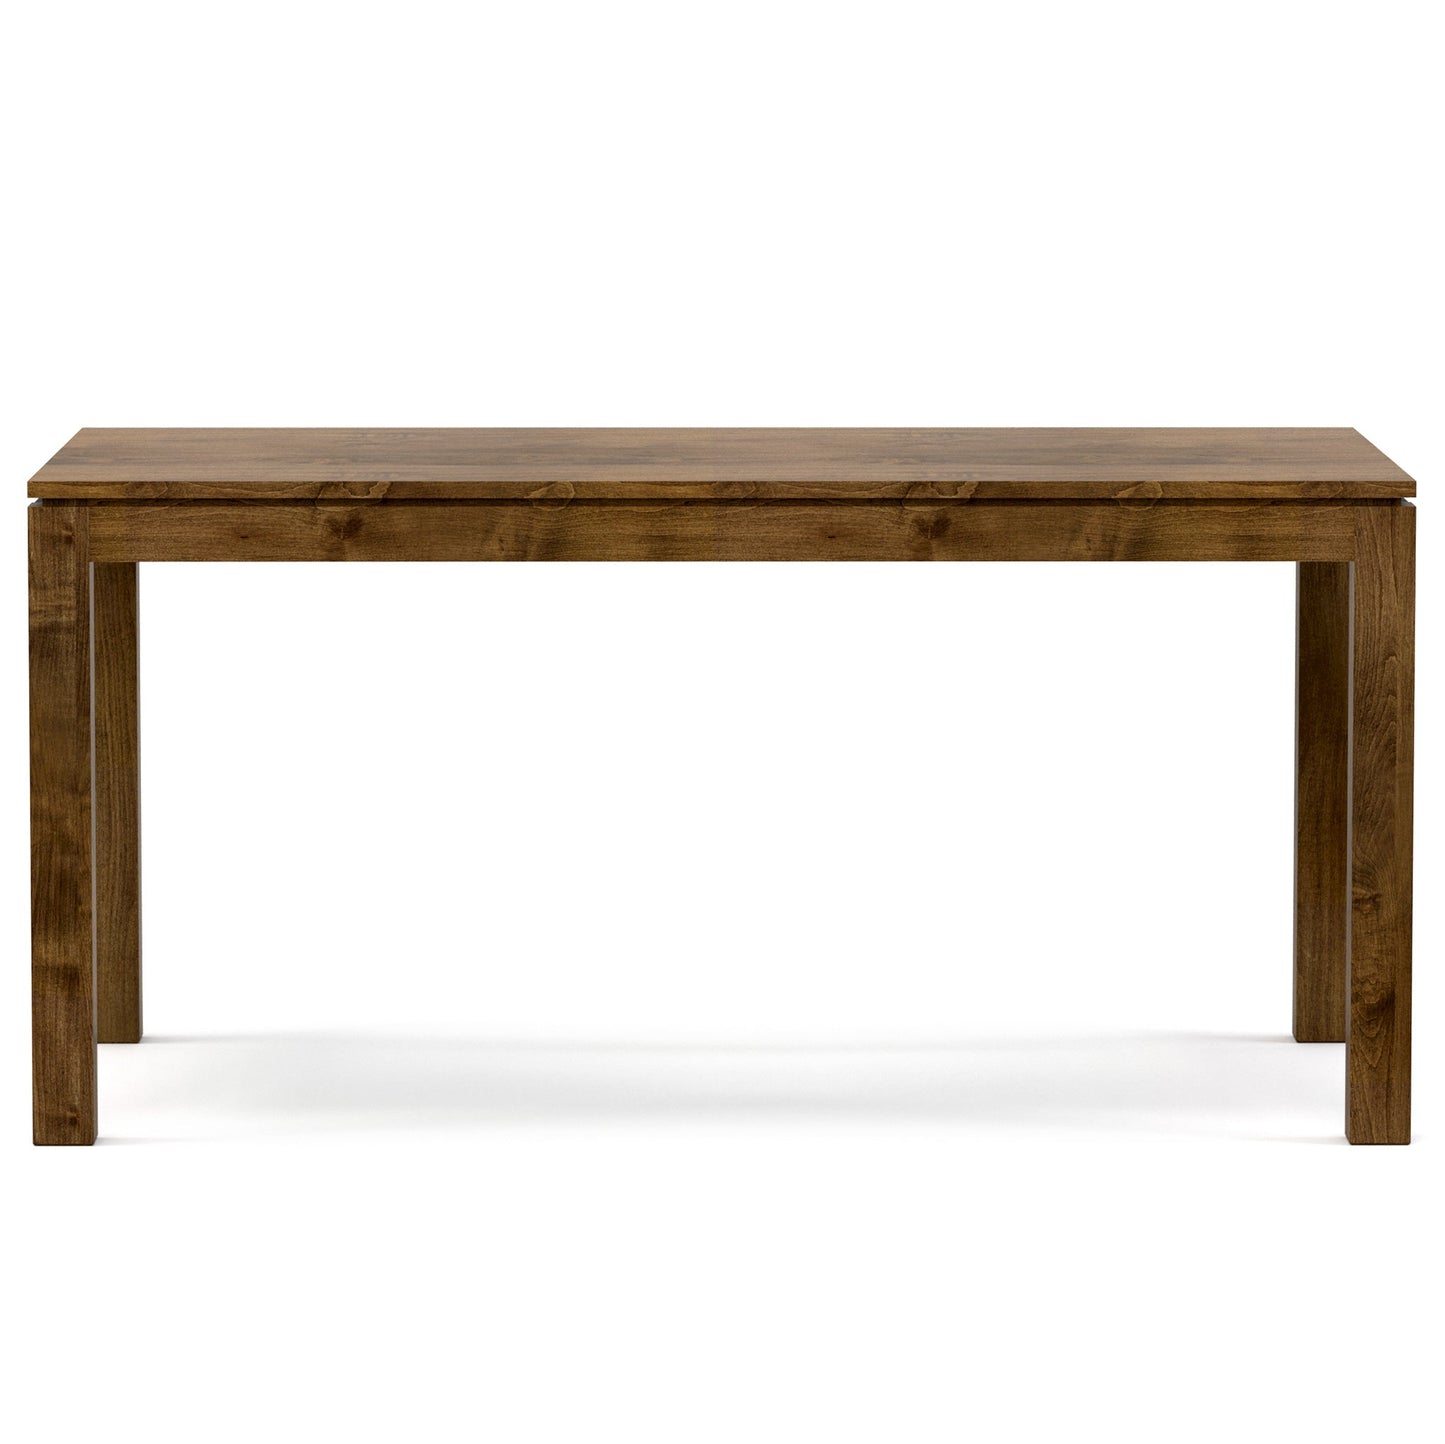 Dwyer 62-inch Dining Table